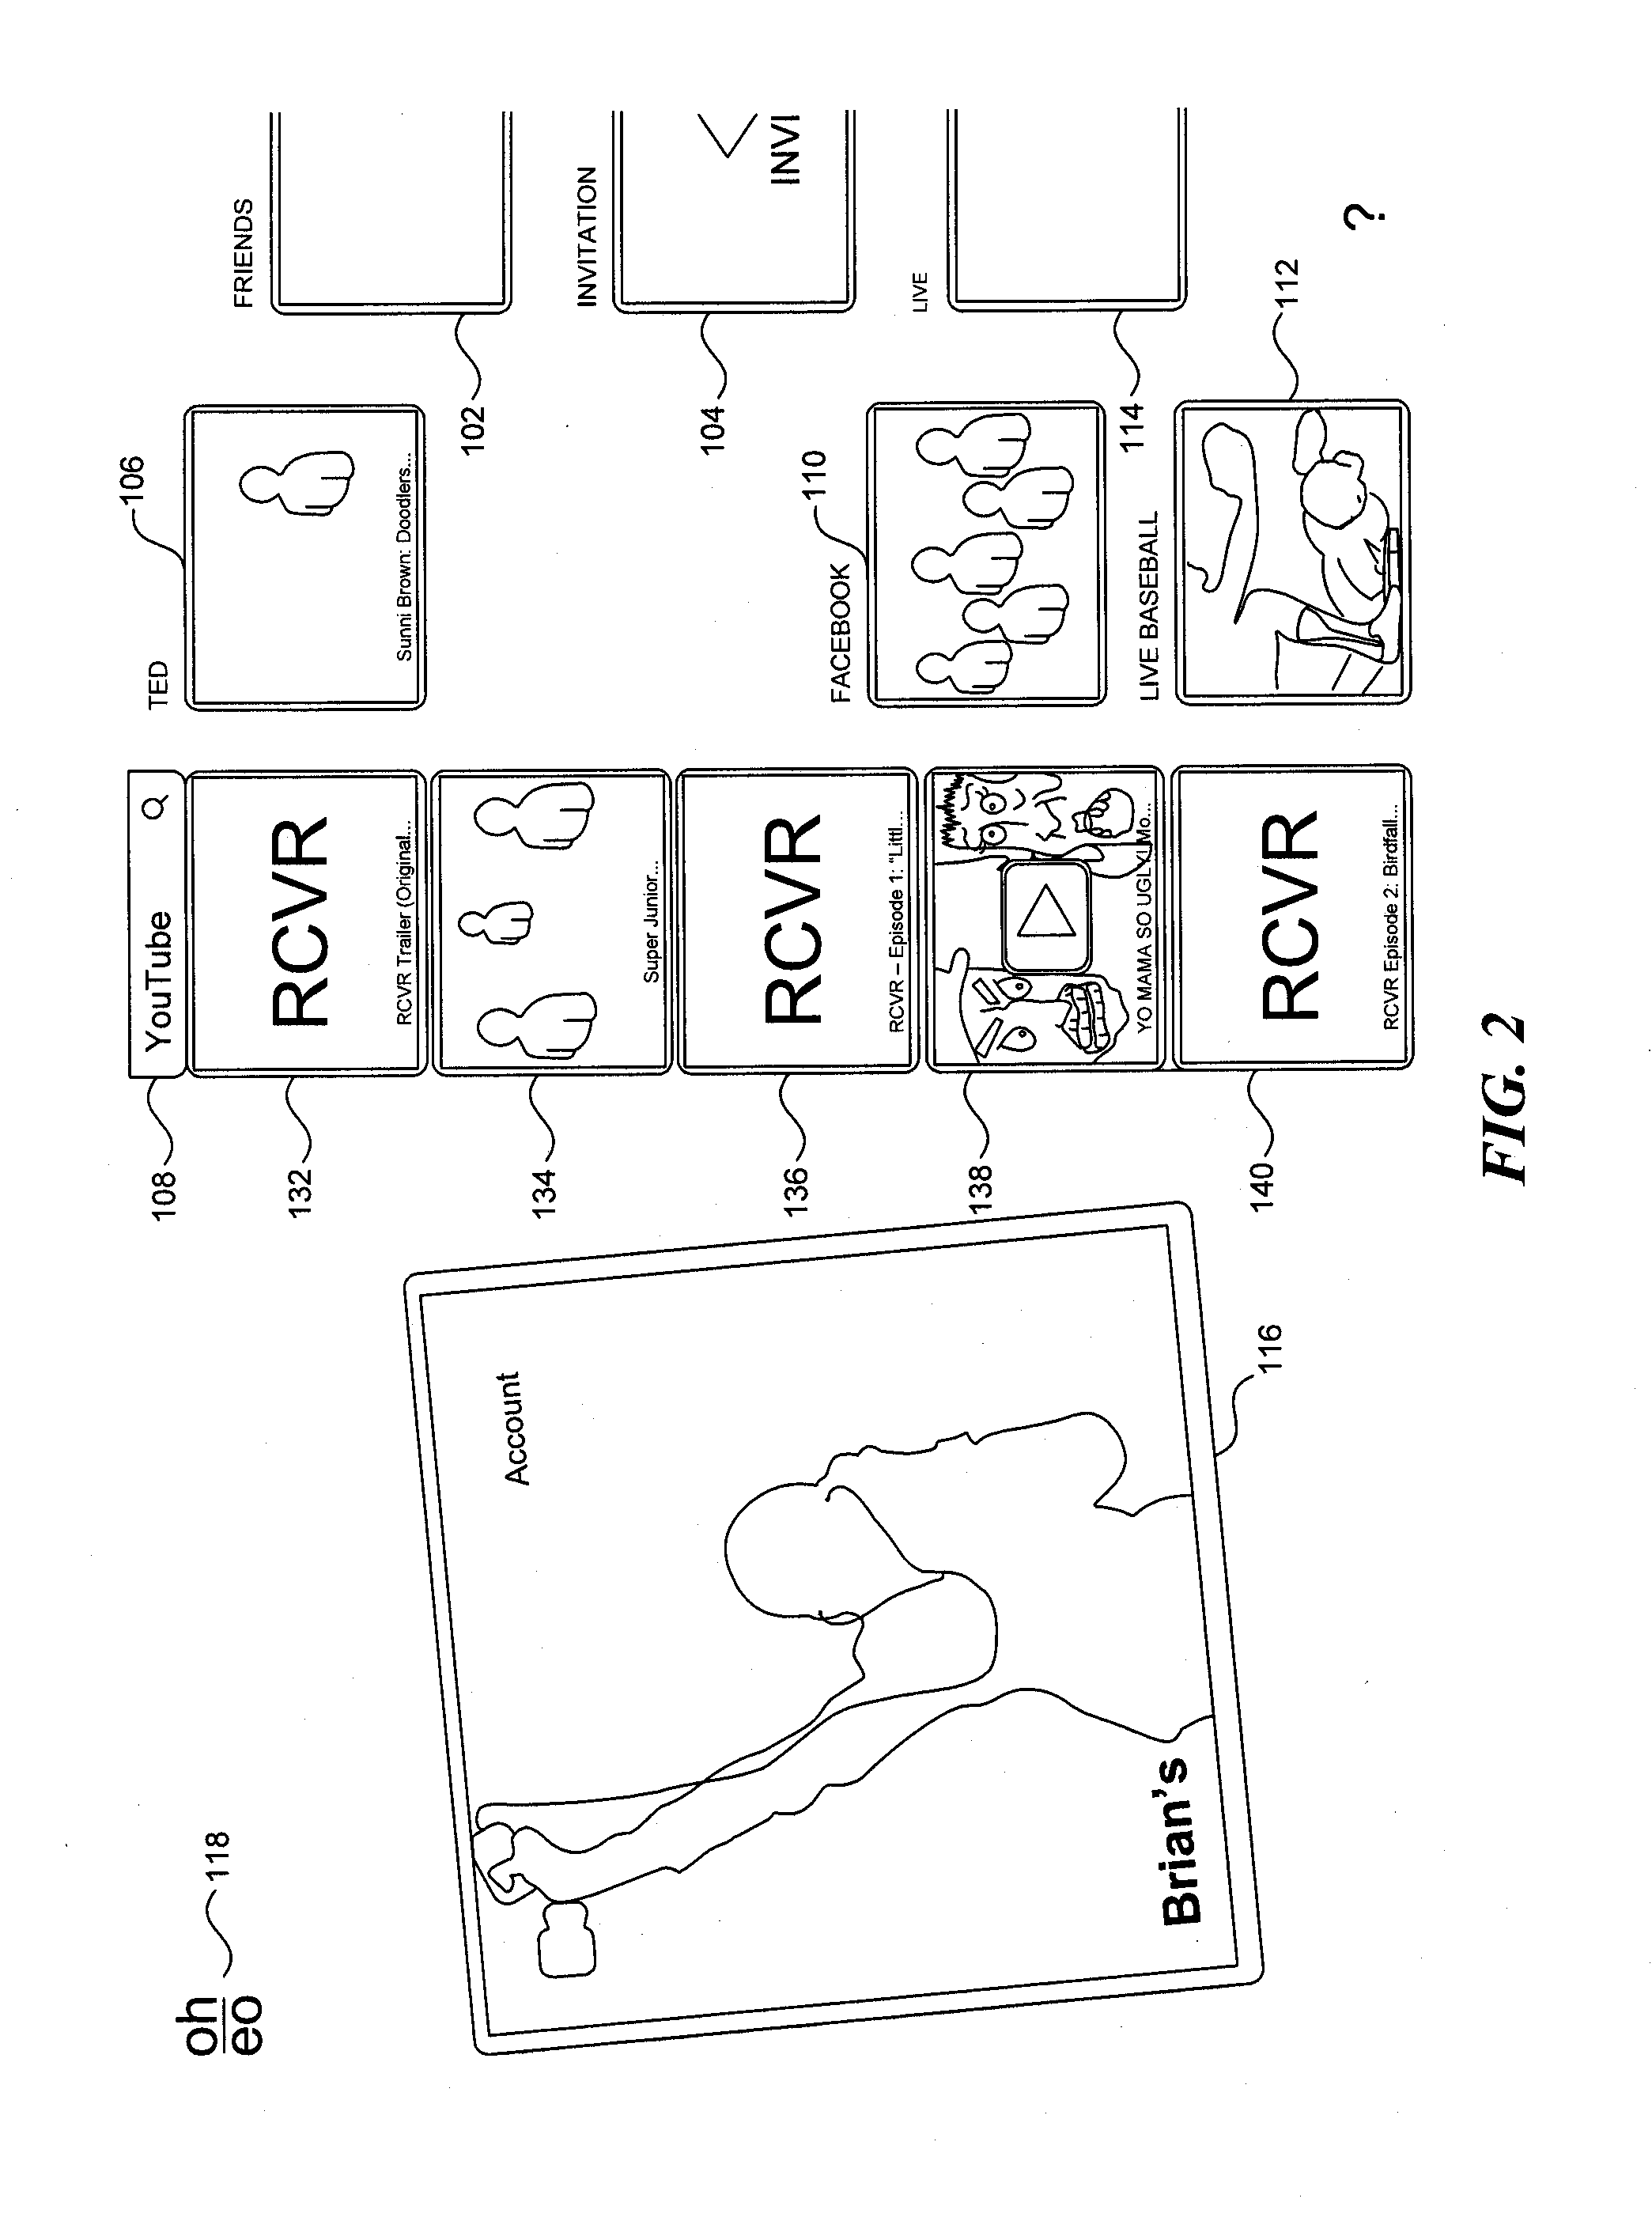 Methods and systems for image sharing in a collaborative work space